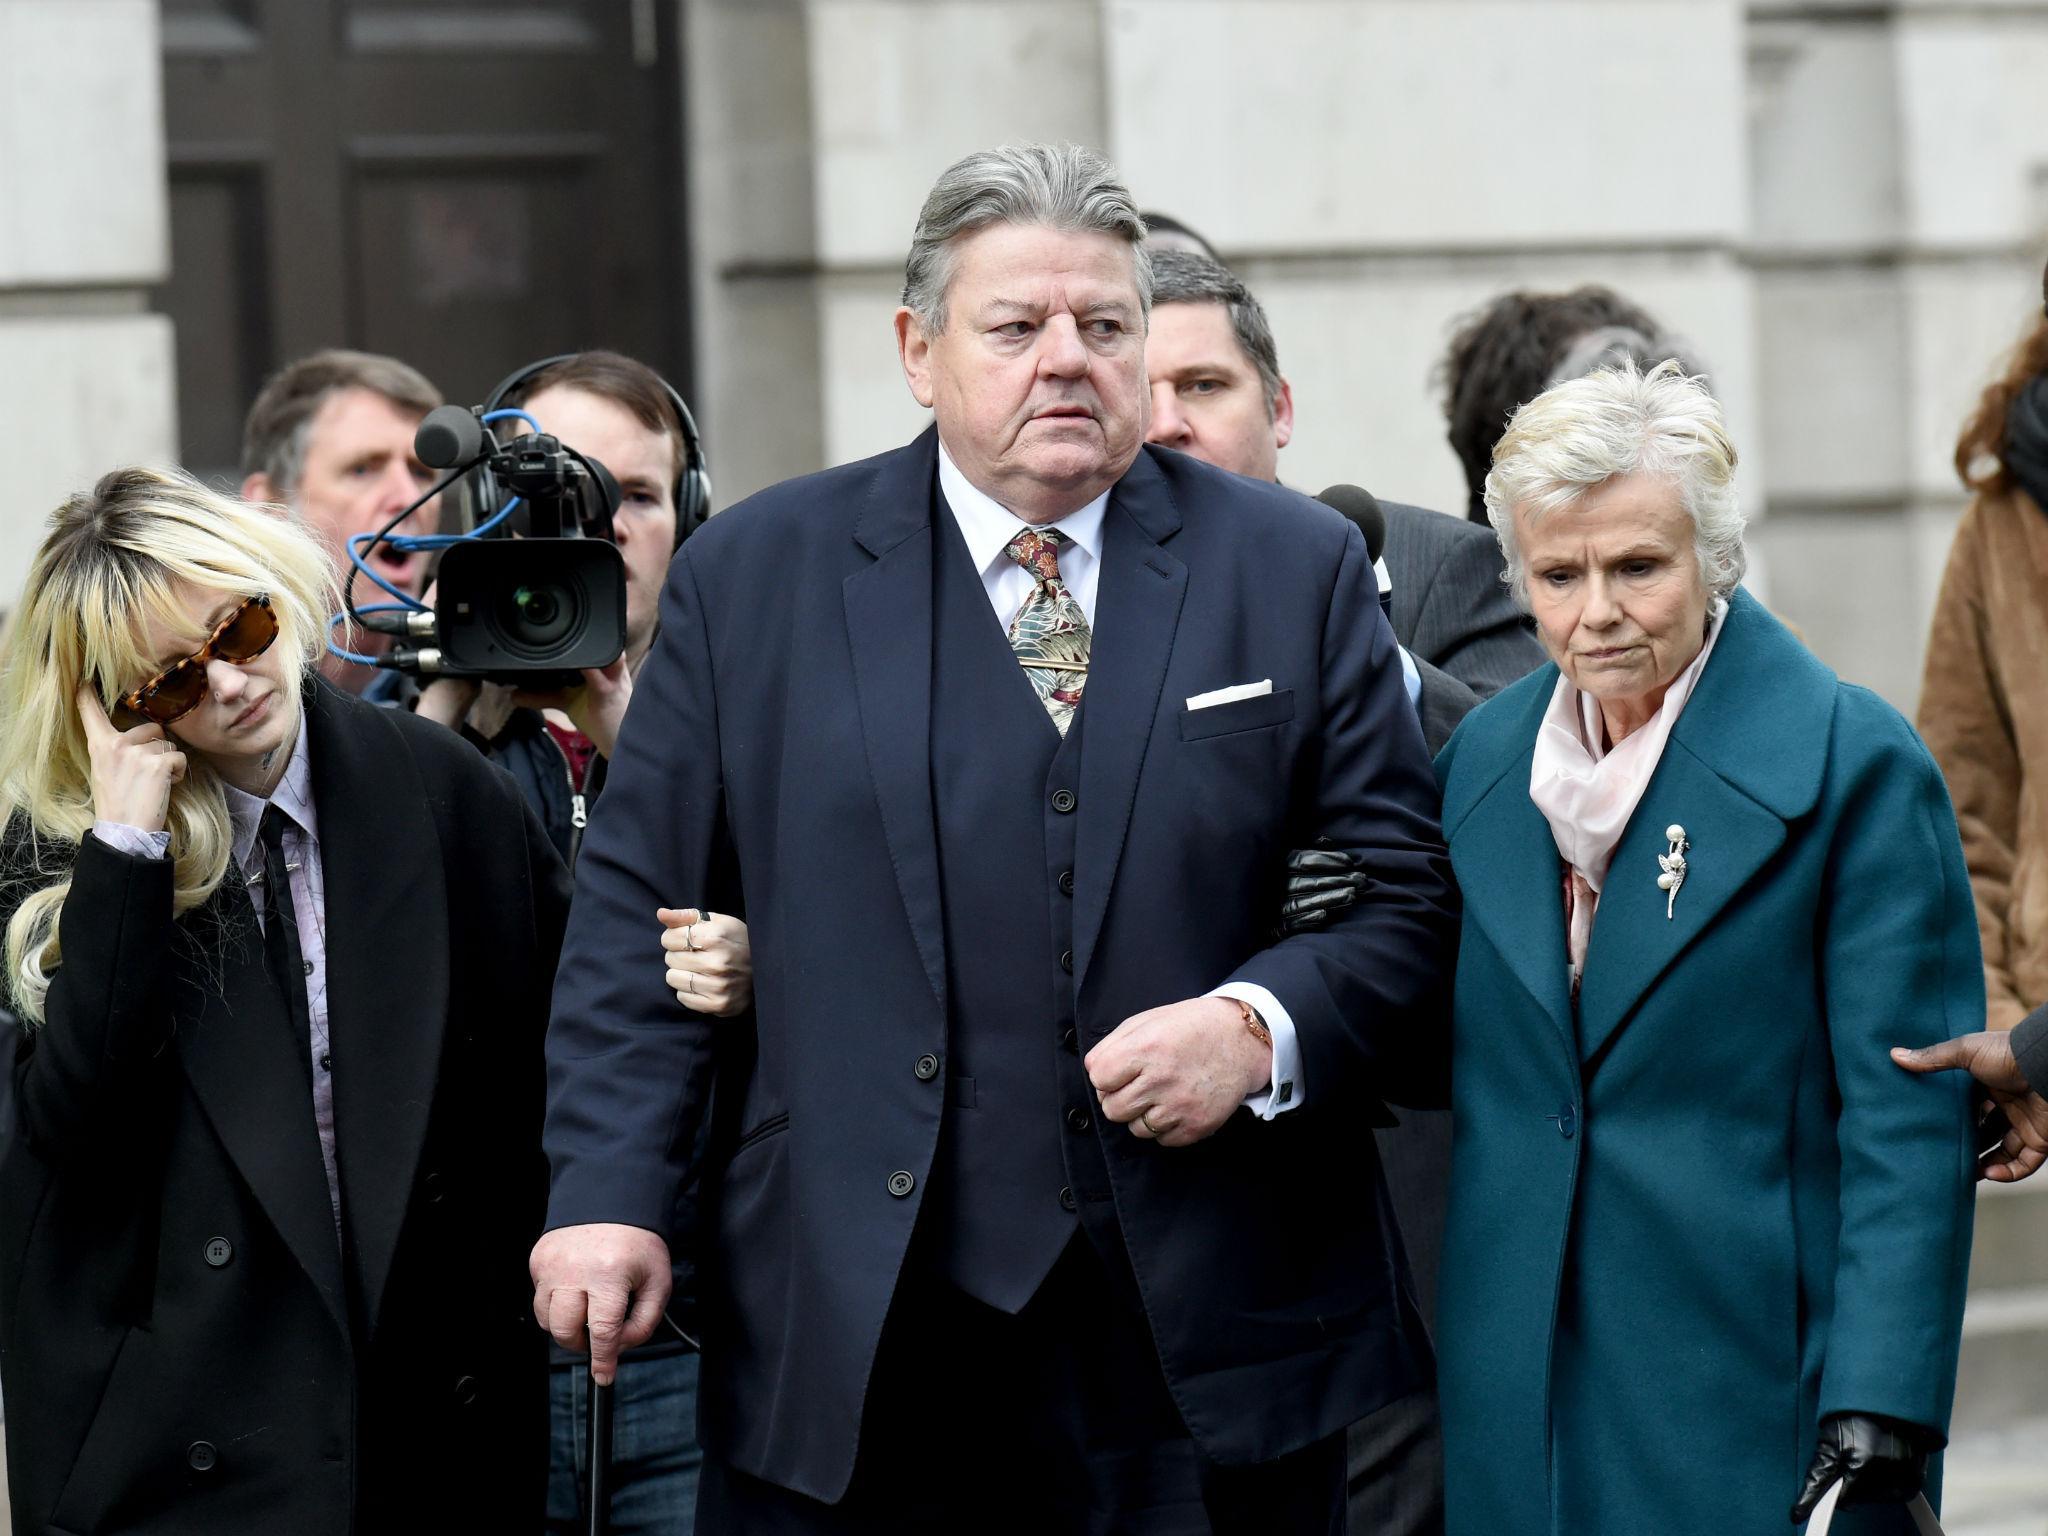 Robbie Coltrane and Julie Walters on set filming National Treasure